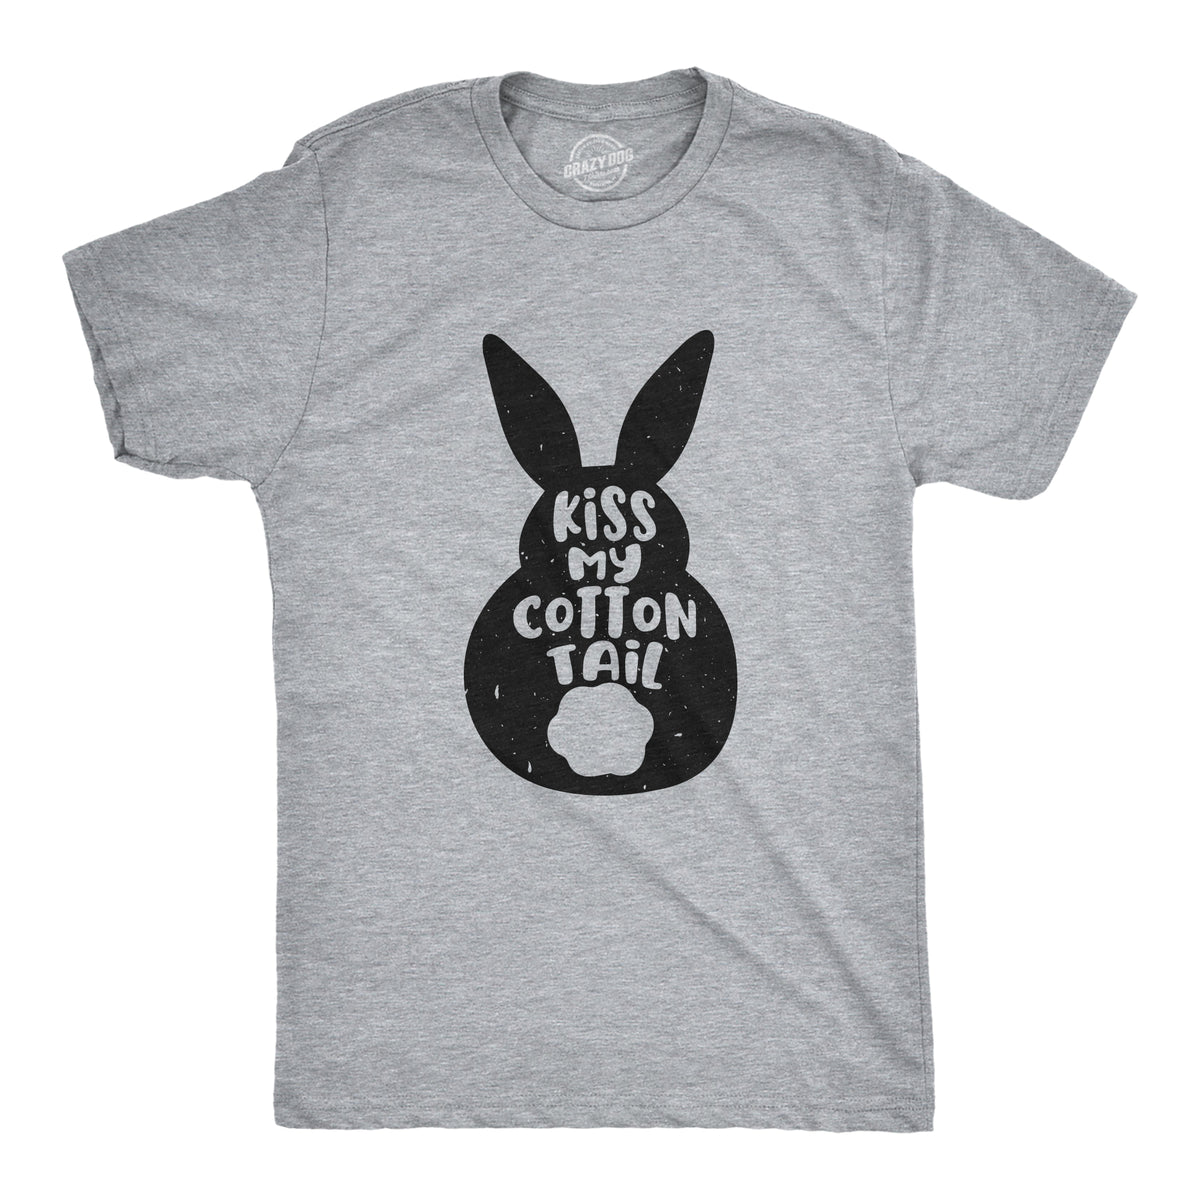 Funny Light Heather Grey - KISS Kiss My Cotton Tail Mens T Shirt Nerdy Easter Sarcastic Tee